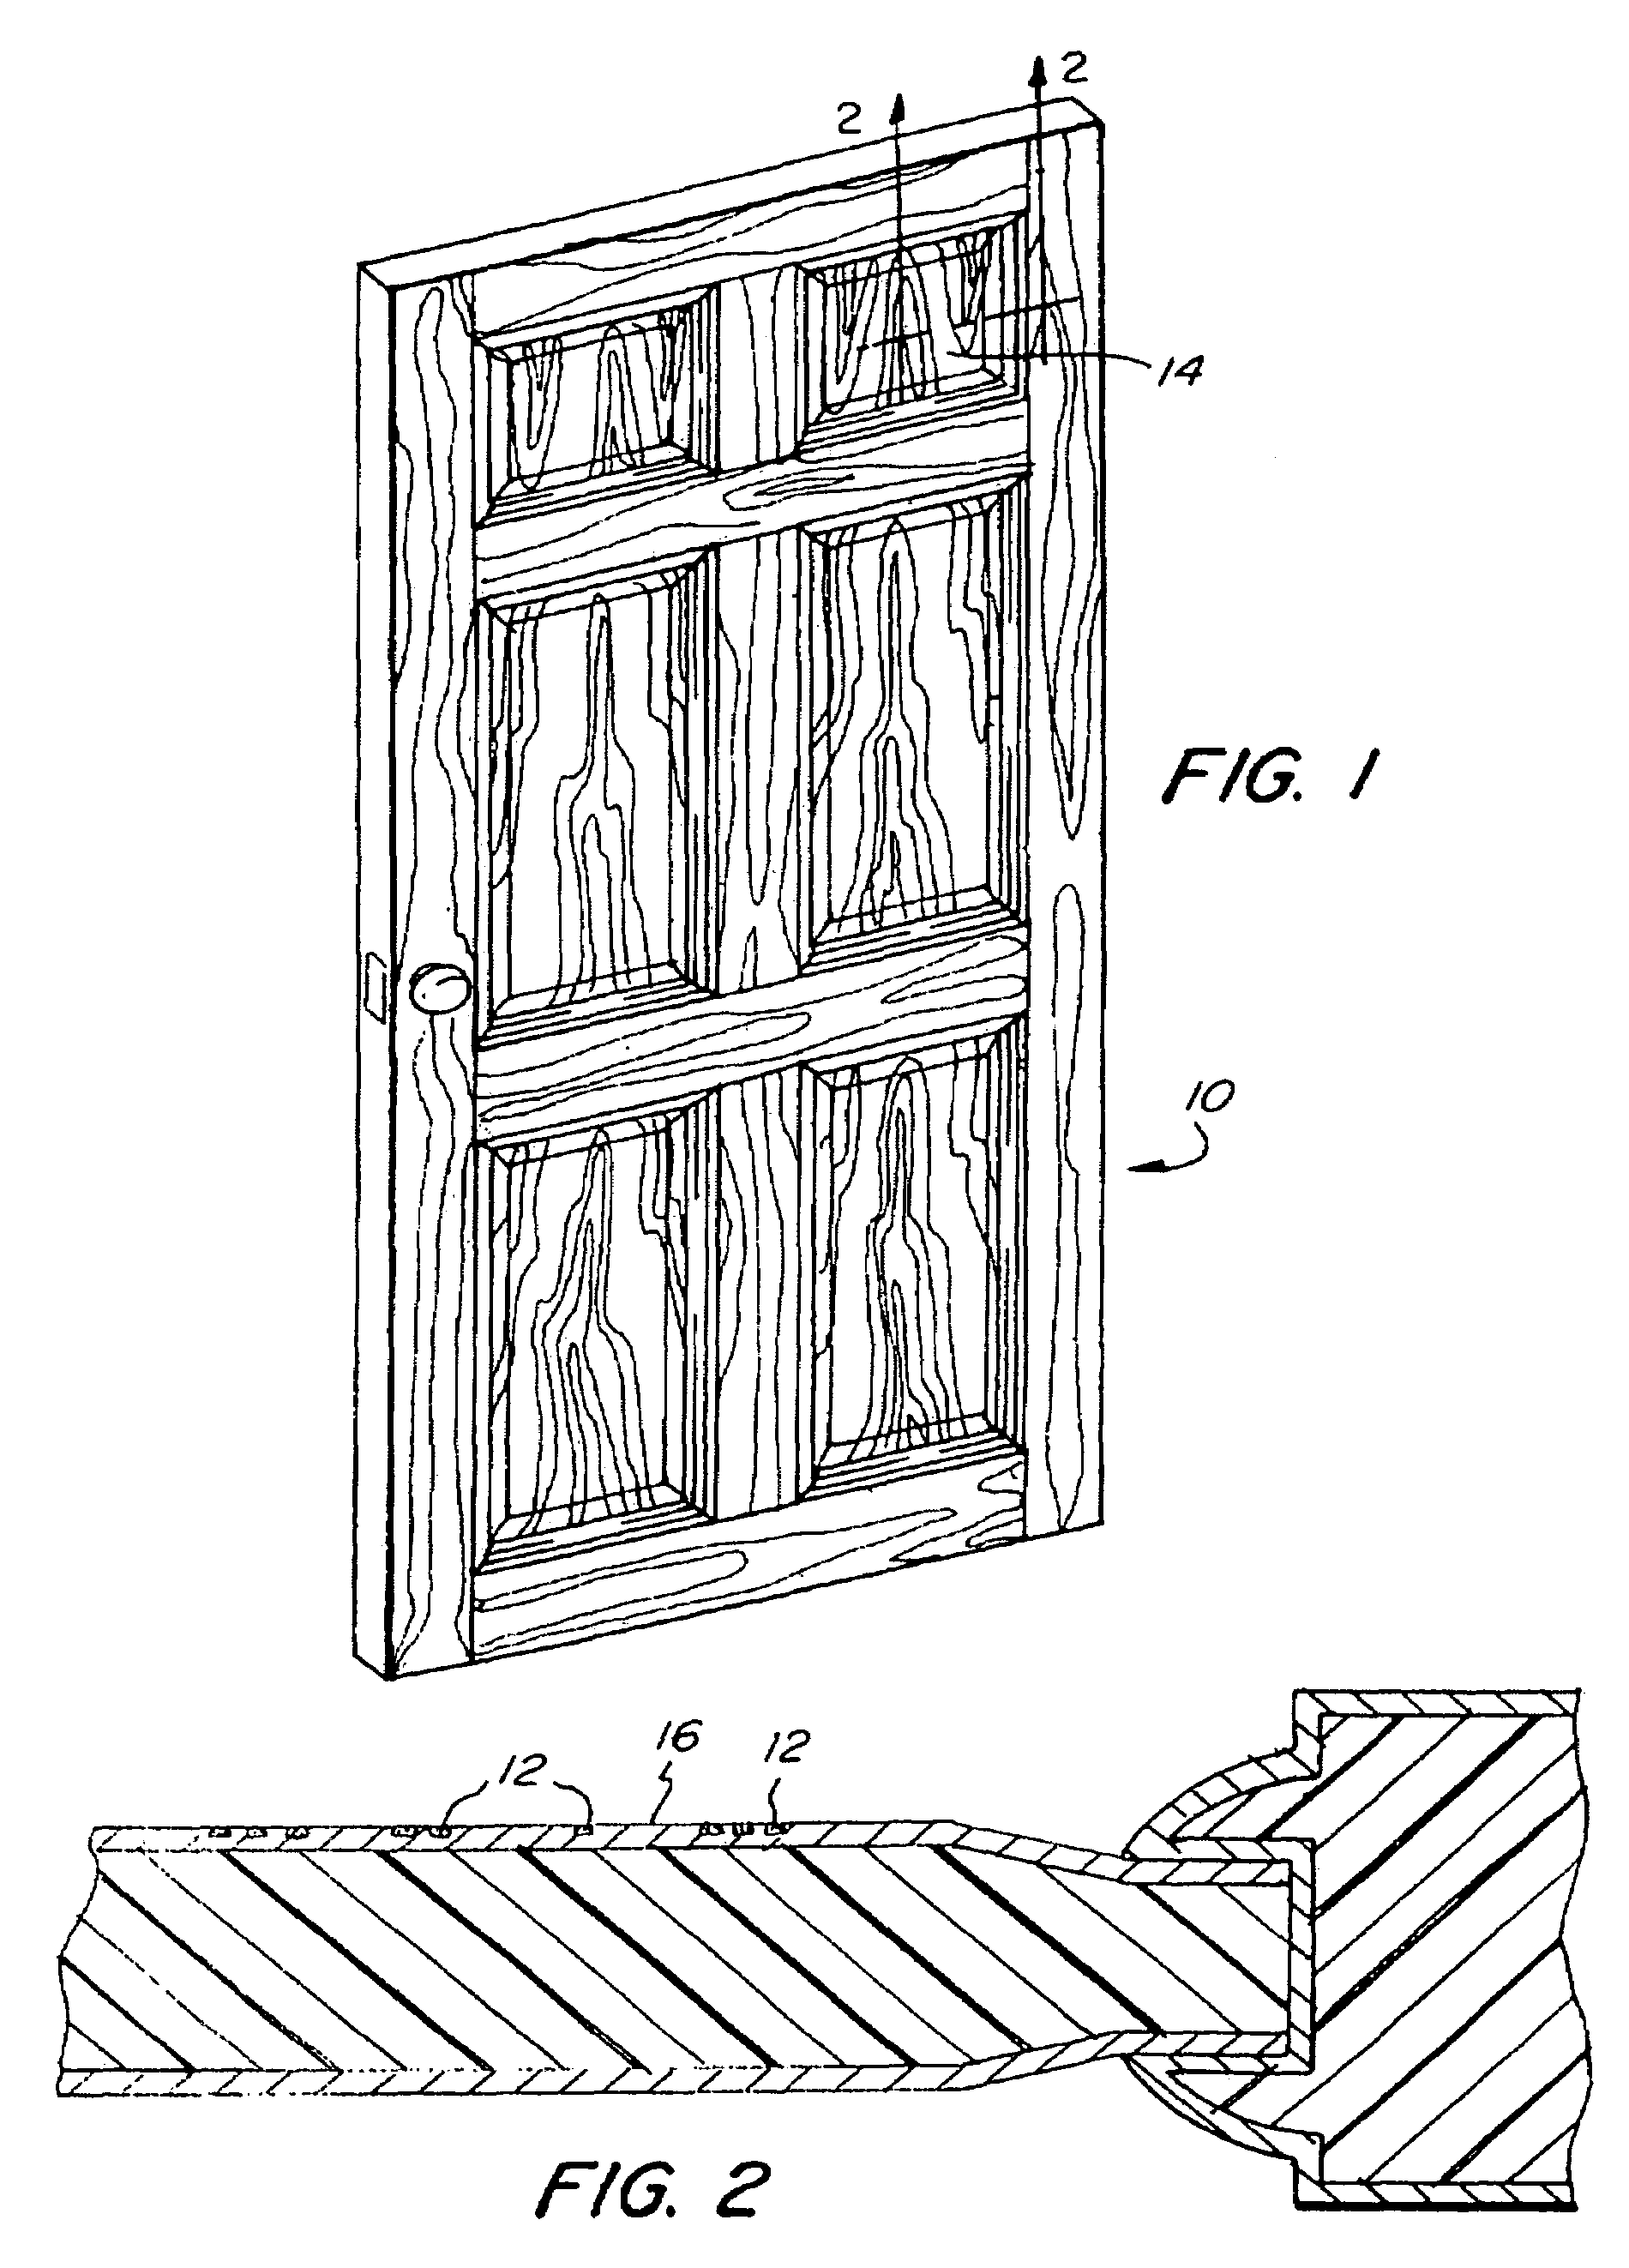 Process for imparting a wood color and grain to a substrate